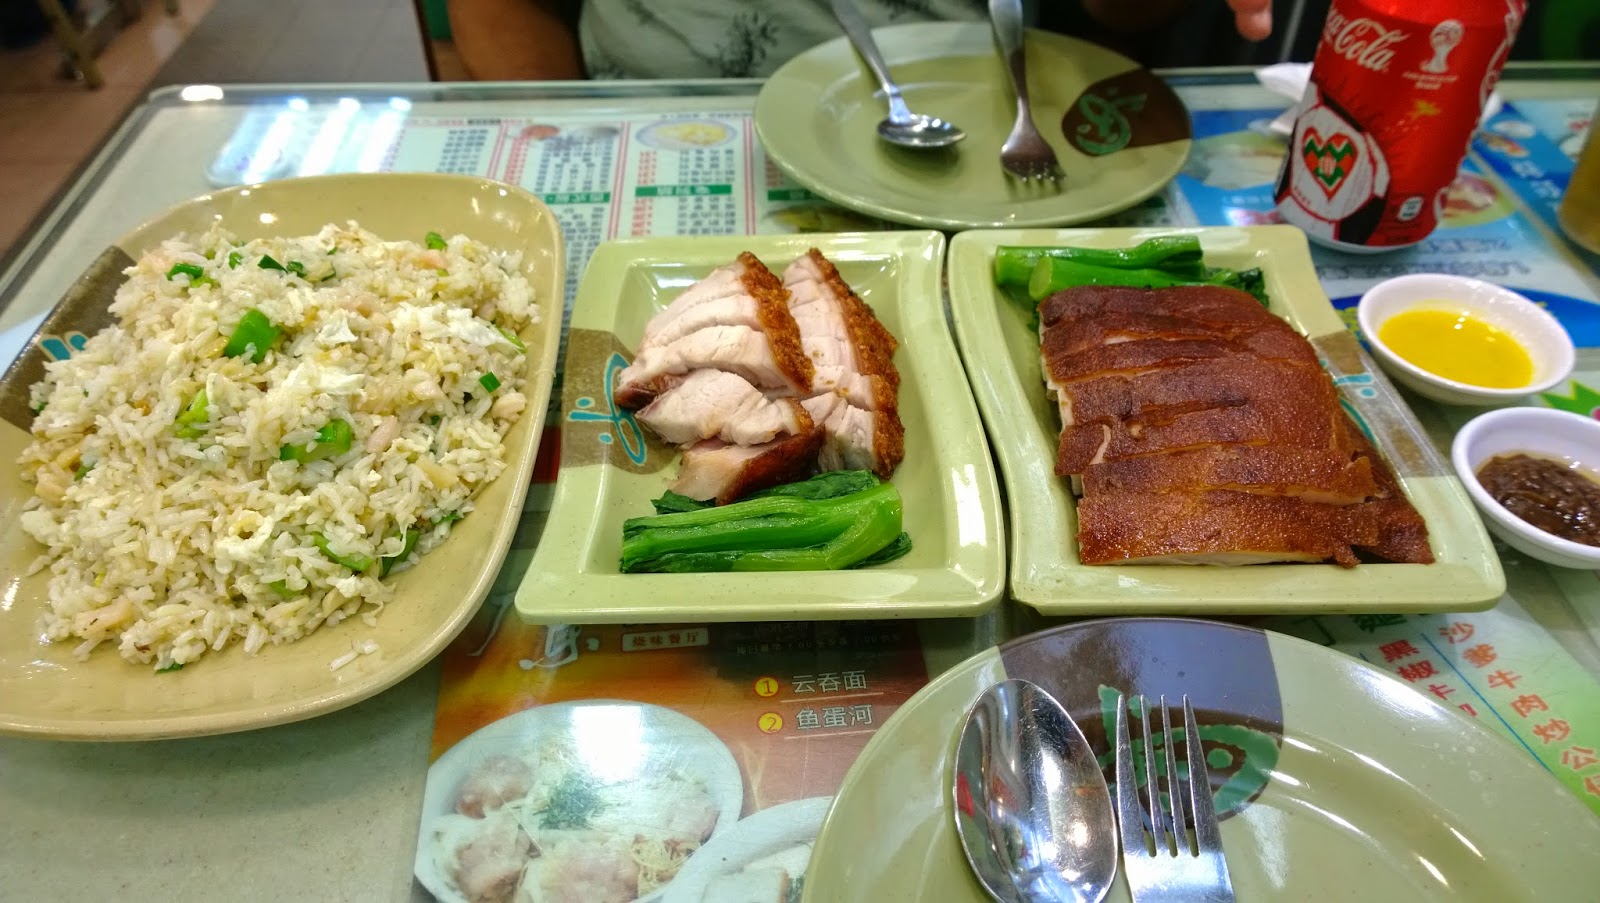 Pork In The Road Guangdong Barbecue In Sham Shui Po Finding An Old Friend In A New Place